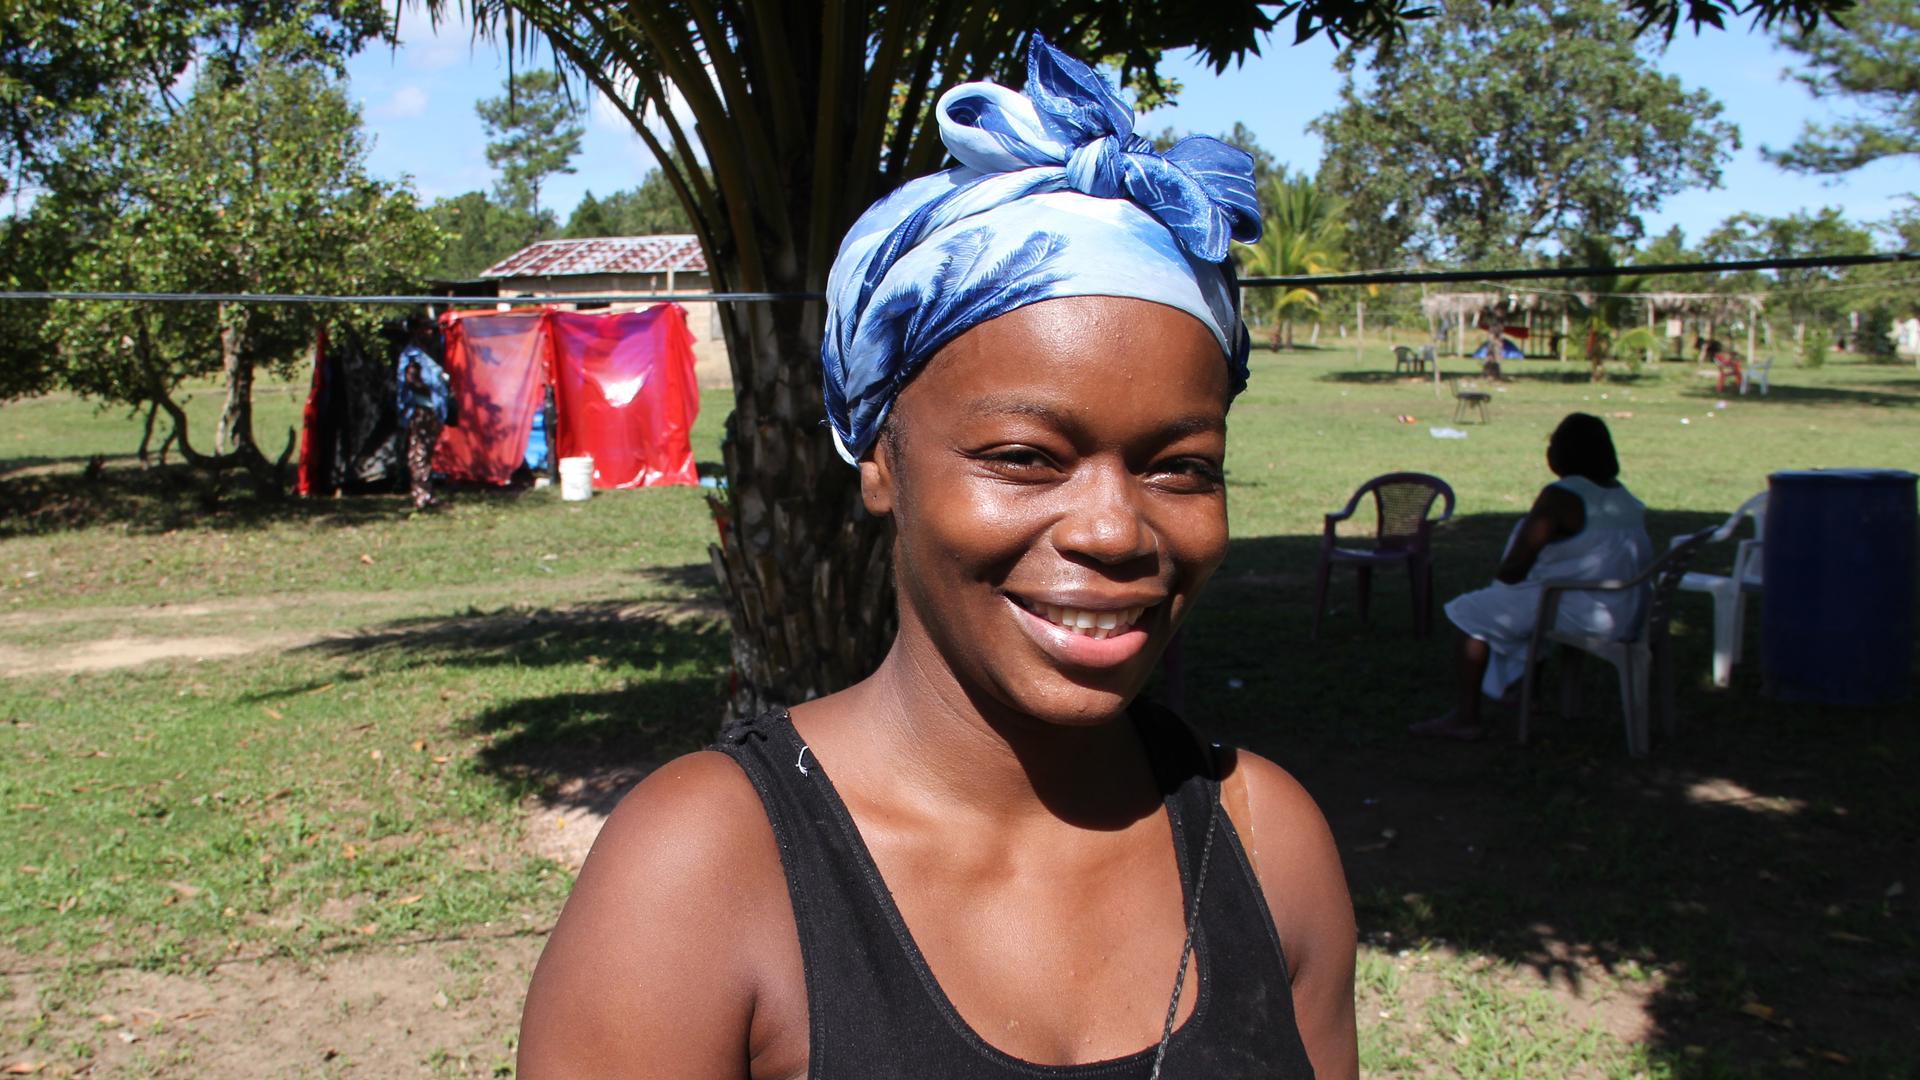 Yillian David is a Garifuna living in Honduras. She's thought of leaving to go to the US, but she's decided to stay to help preserve her culture.